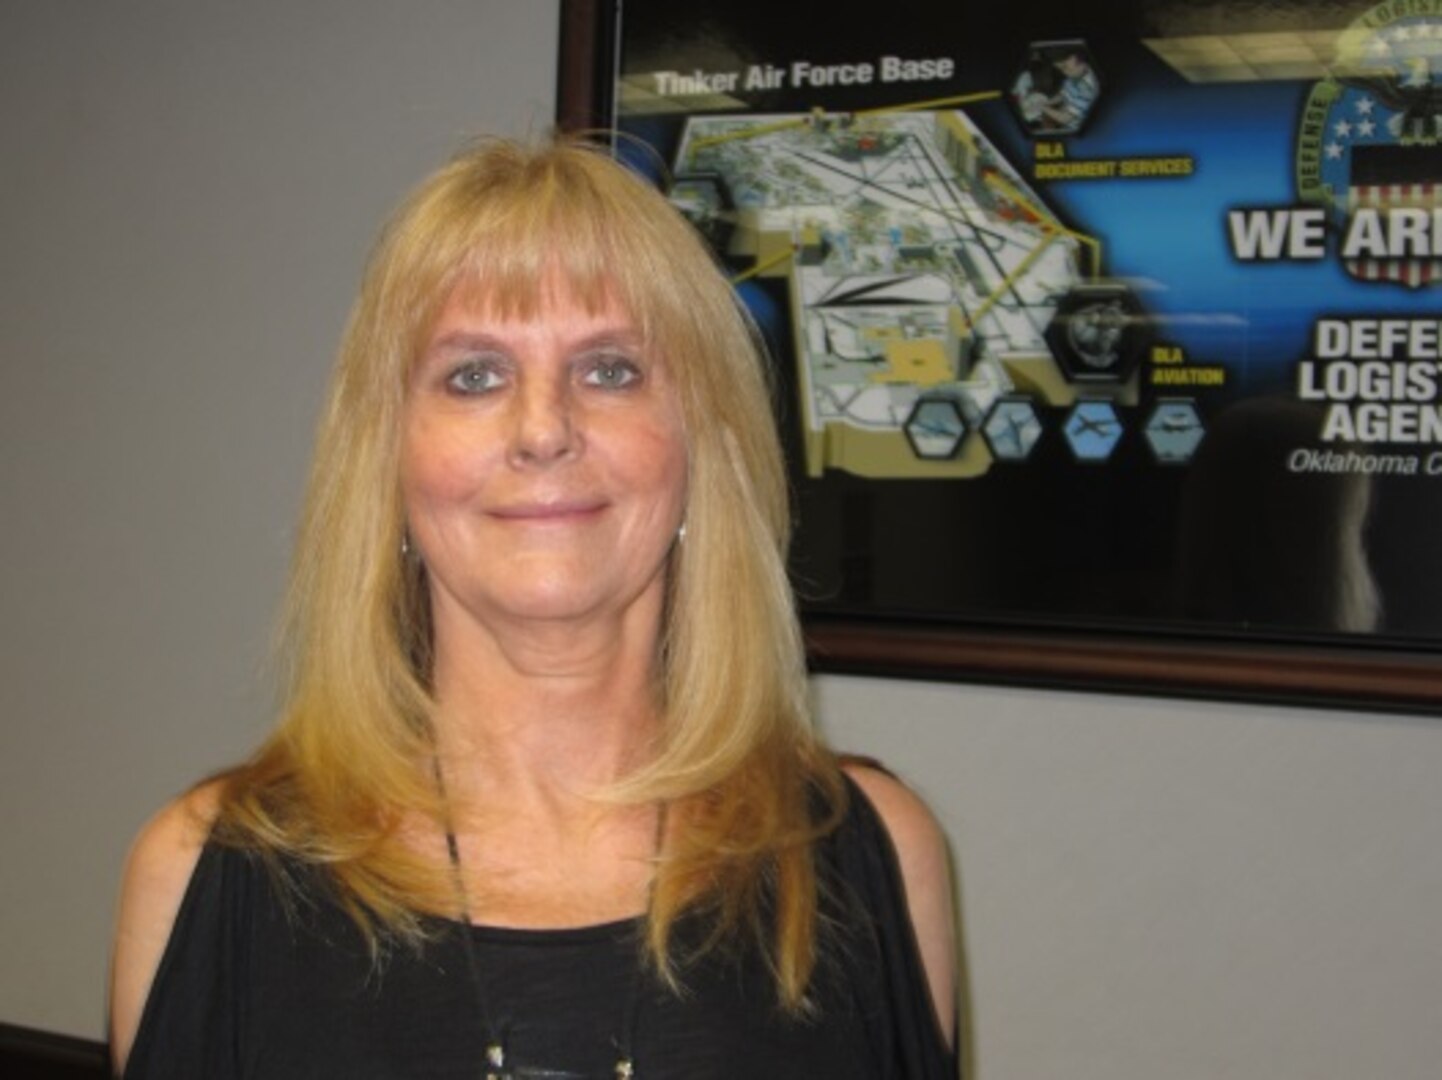 Bikki Queen, administrative assistant at DLA Distribution Oklahoma City, Okla., won Clerical/Administrative Assistant Employee of the Year at the 2015 Public Service Recognition Awards.